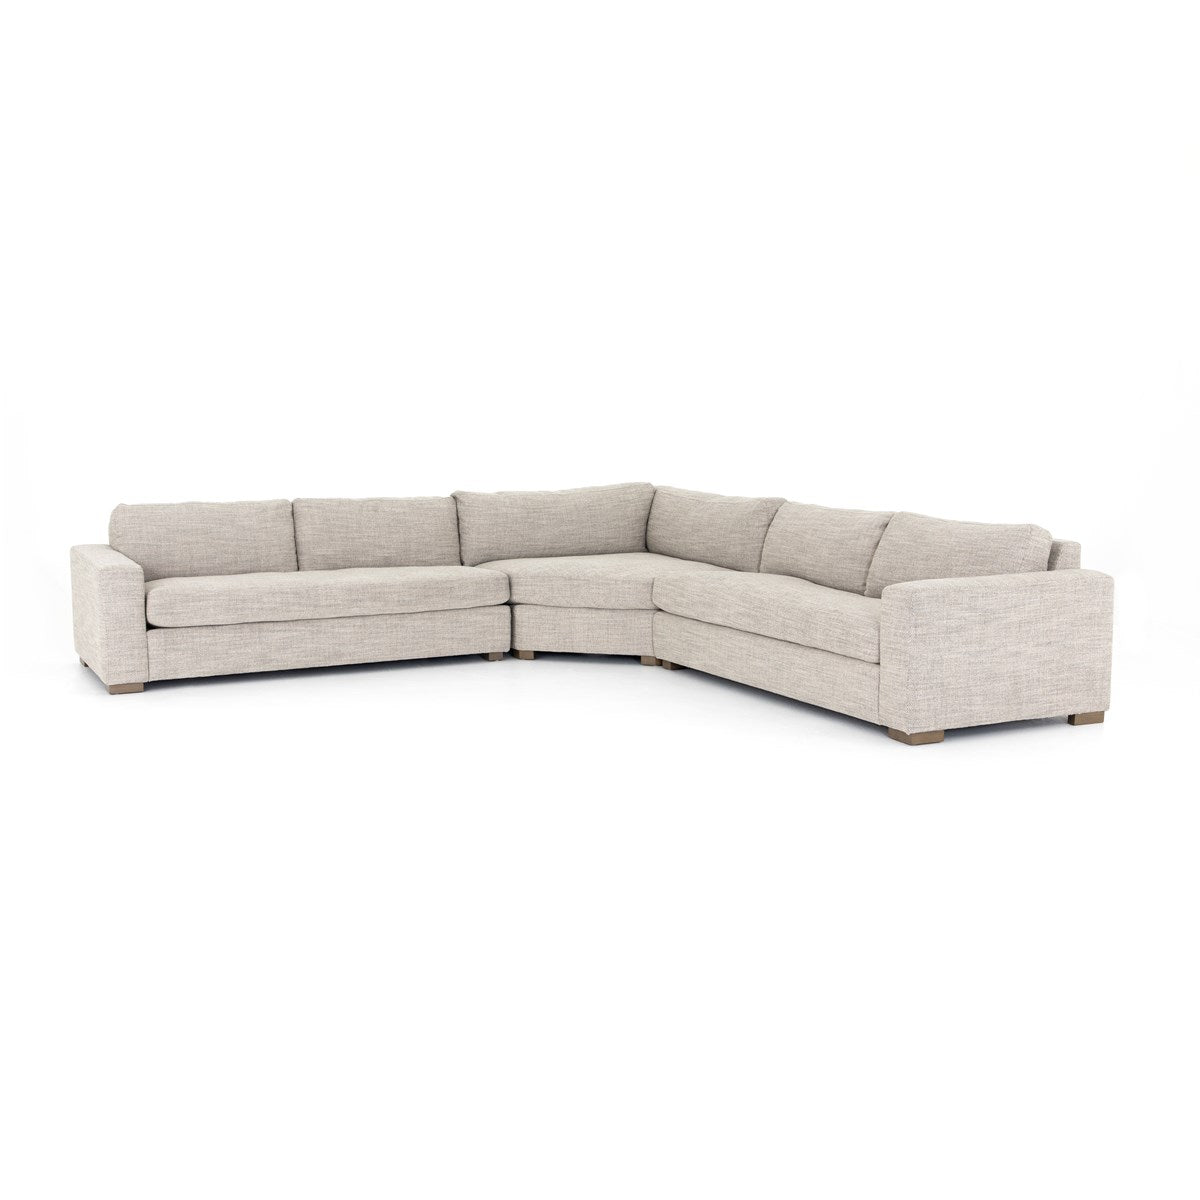 Boone 3-Piece Sectional LargeSectional Sofa Four Hands  Large   Four Hands, Burke Decor, Mid Century Modern Furniture, Old Bones Furniture Company, Old Bones Co, Modern Mid Century, Designer Furniture, https://www.oldbonesco.com/